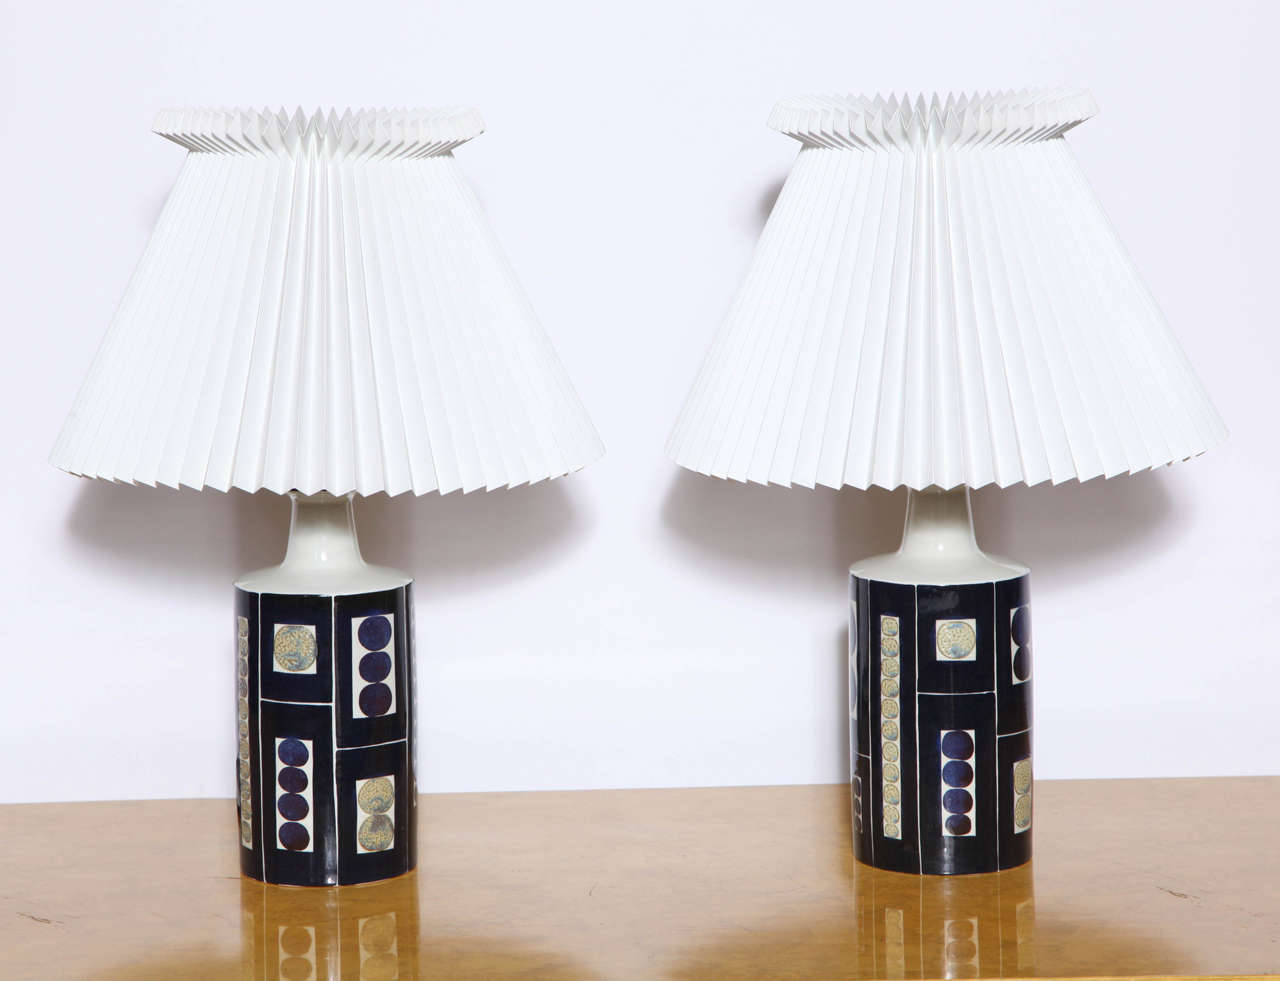 Pair of late 1960s Aluminia ceramic lamps commissioned by Fog & Mørup with a design by Inge-Lisa Koefoed.